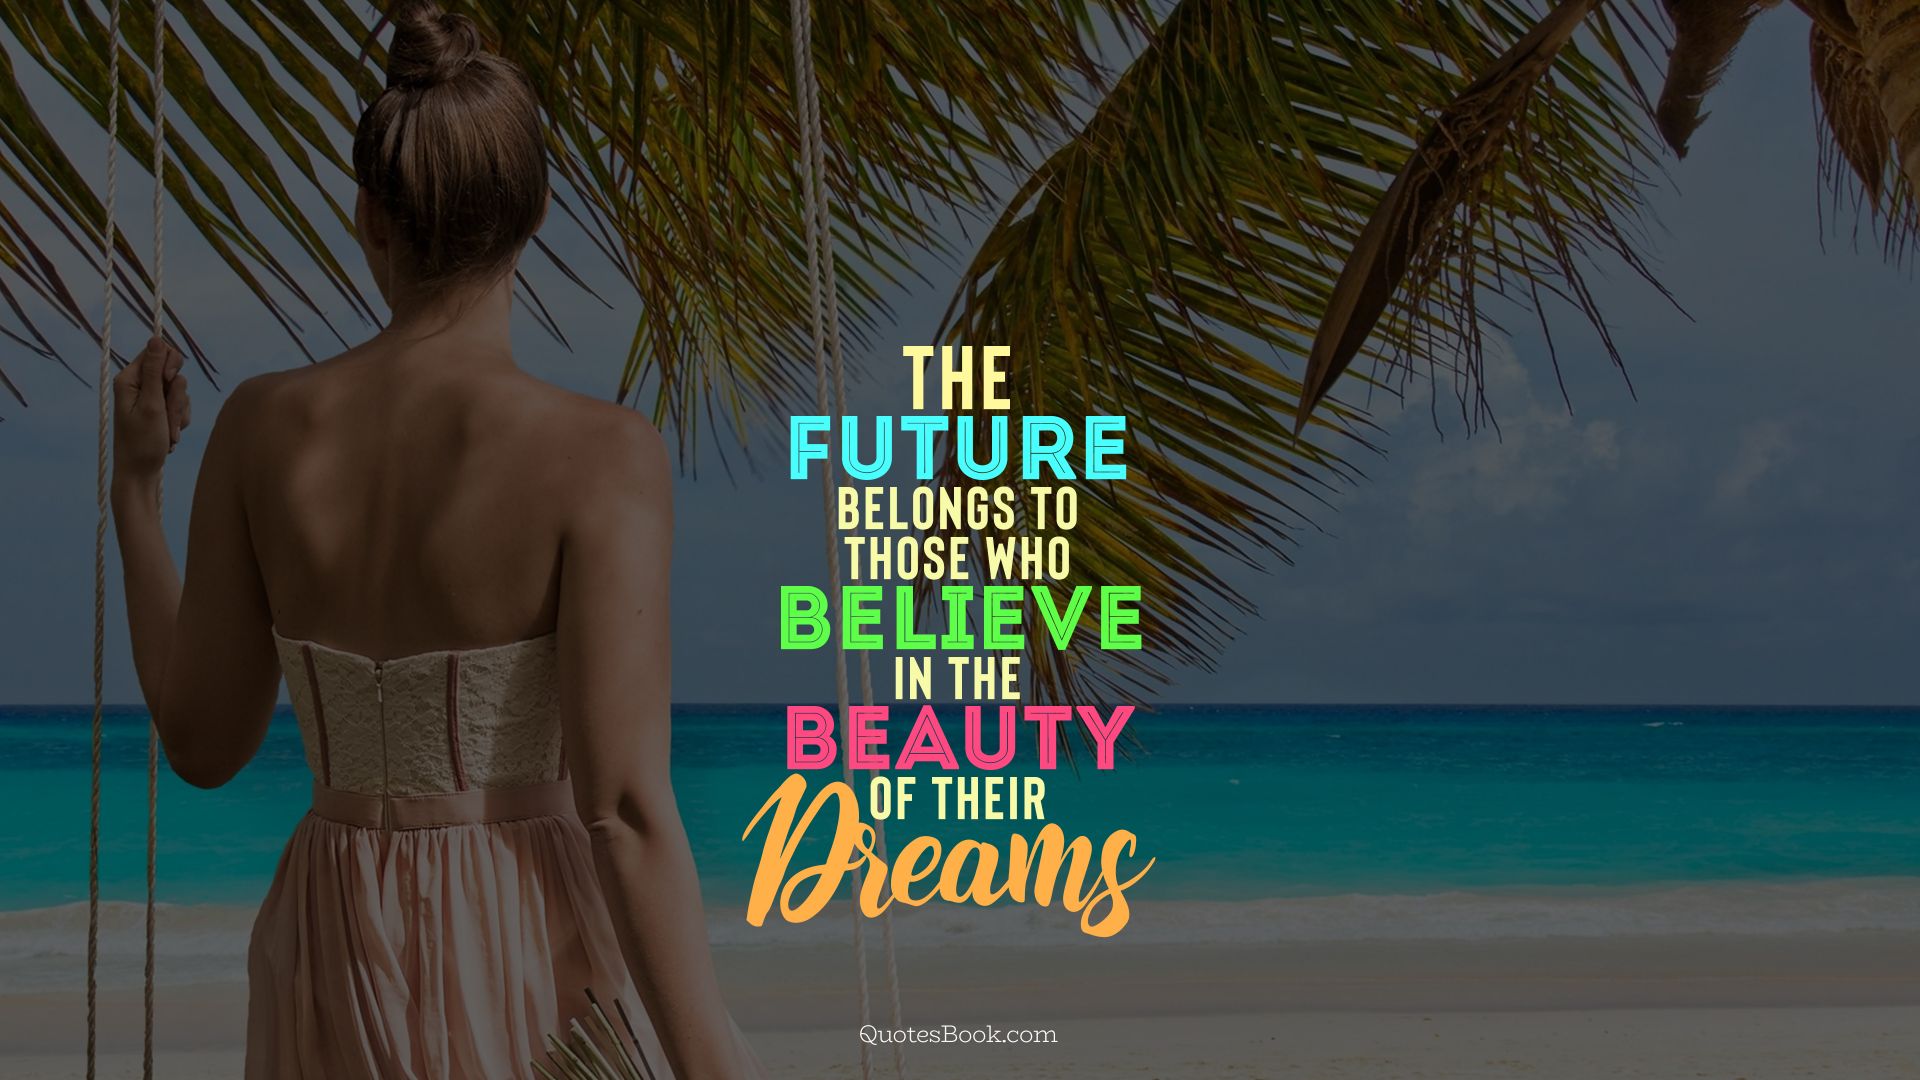 The future belongs to those who believe in the beauty of their dreams. 